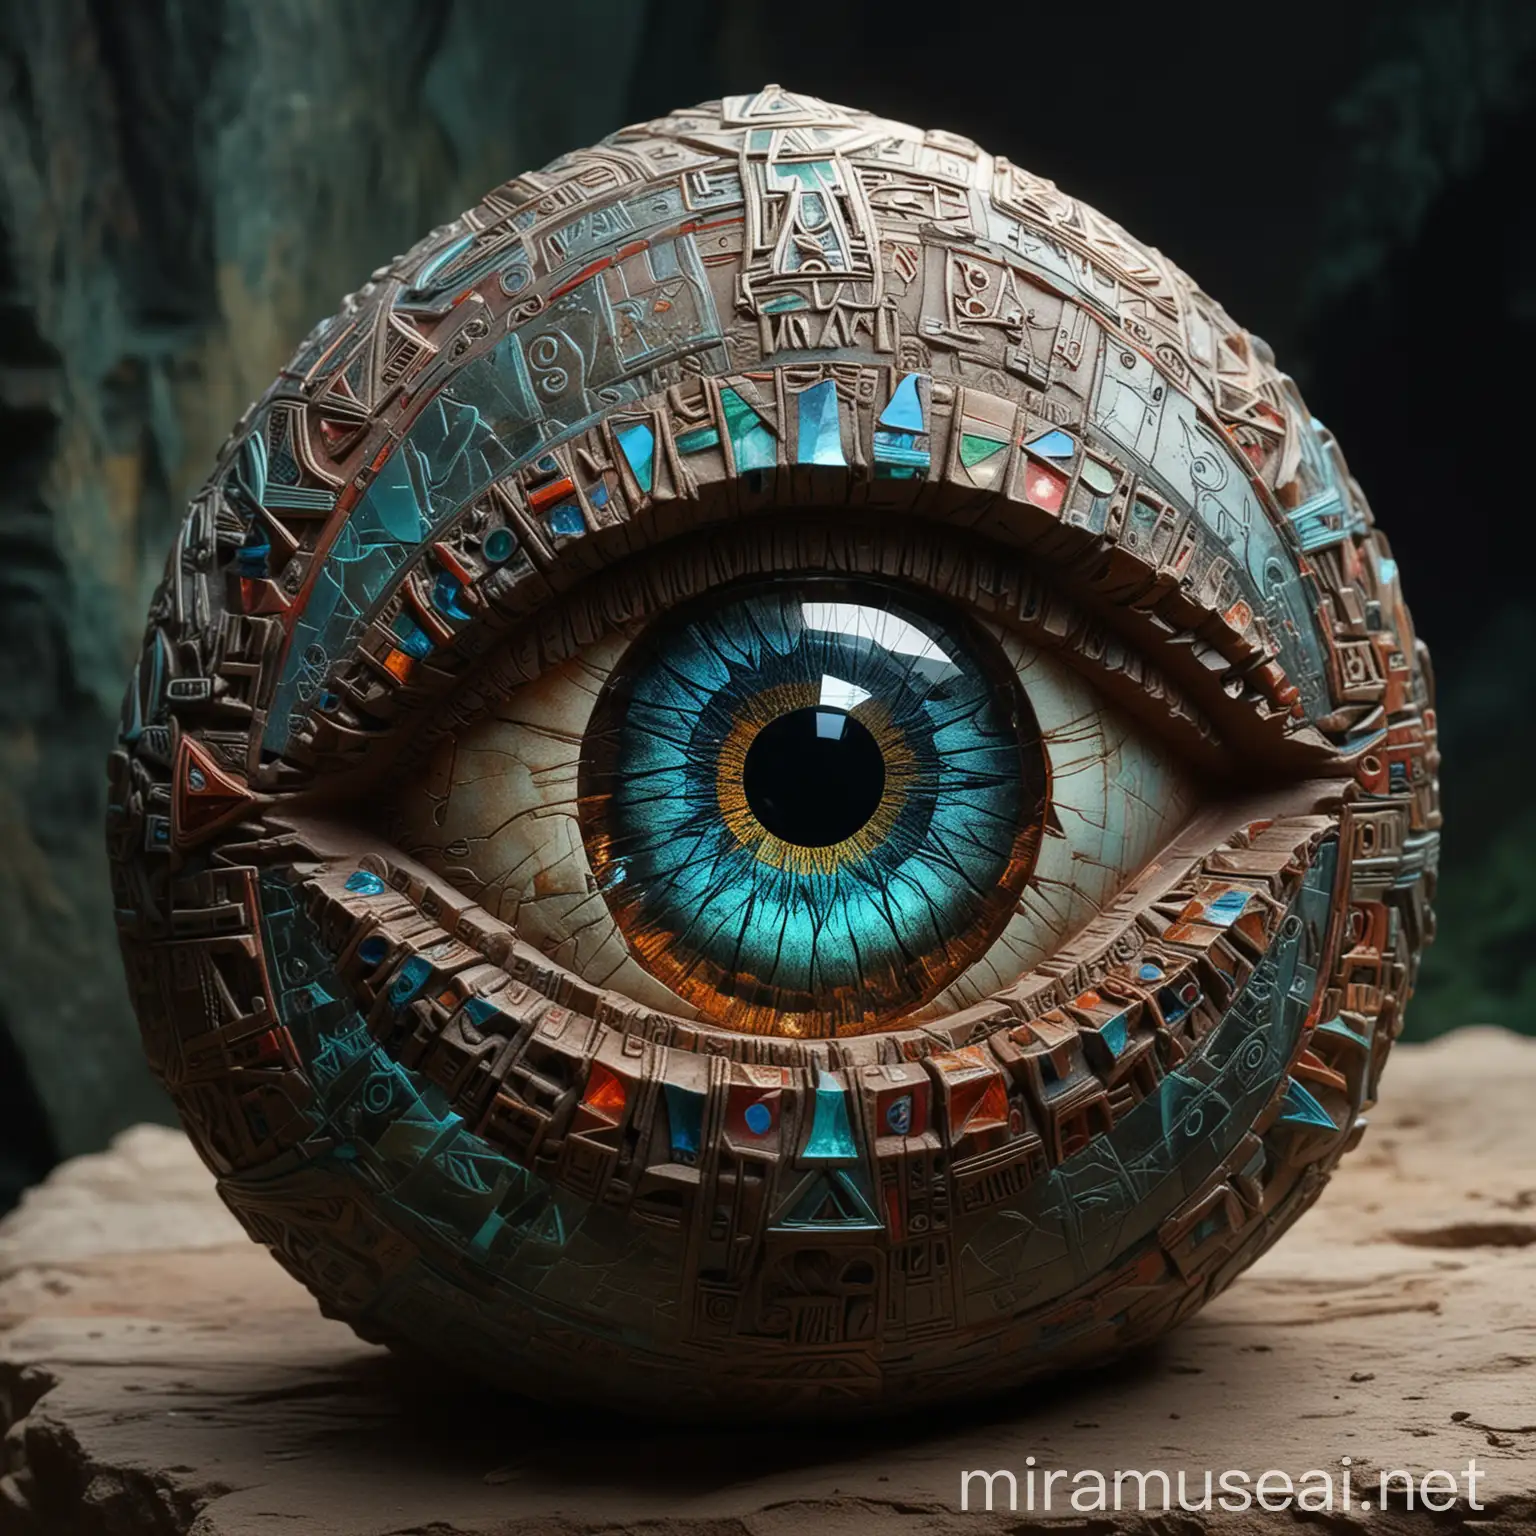 an ancient, intricately designed artifact resembling a large, crystalline eye. Its surface shimmers with a myriad of colors, shifting and changing as if alive. The artifact radiates an aura of immense power, its very presence imposing and awe-inspiring. Runes and symbols from an ancient civilization are etched into its surface, hinting at its origin and purpose.